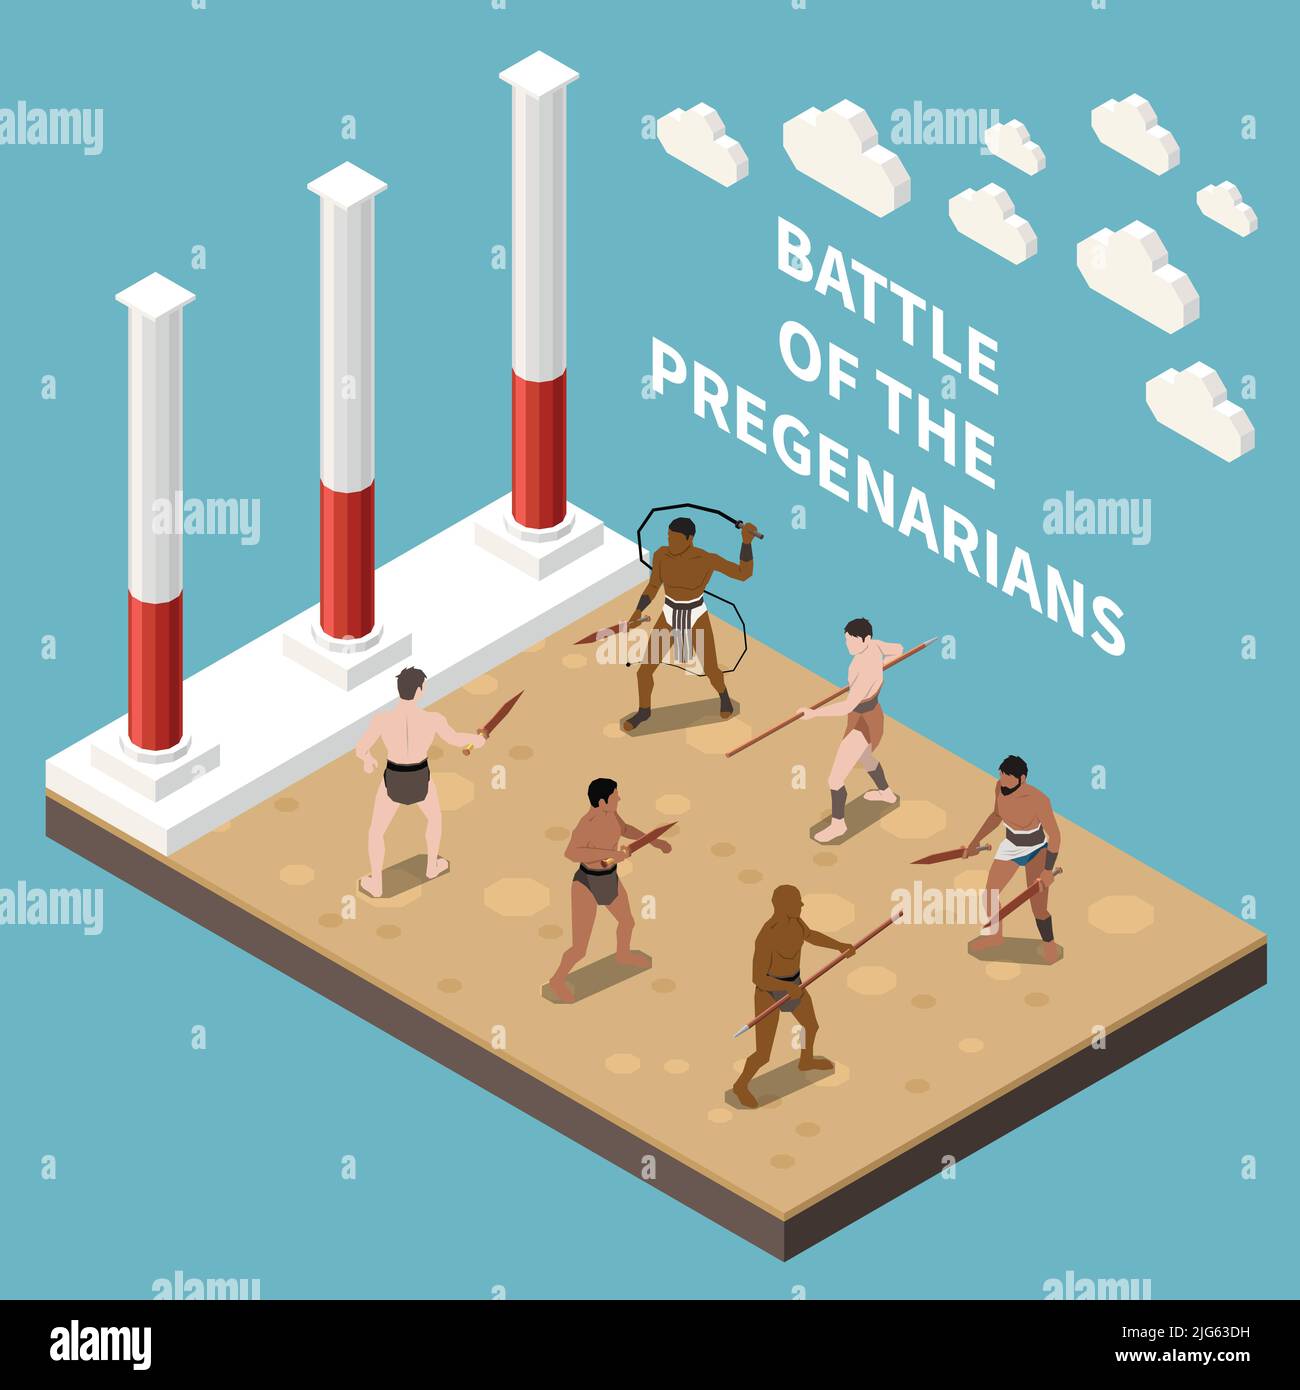 Roman gladiators isometric background demonstrated battle of pregenarians with wooden weapon vector illustration Stock Vector